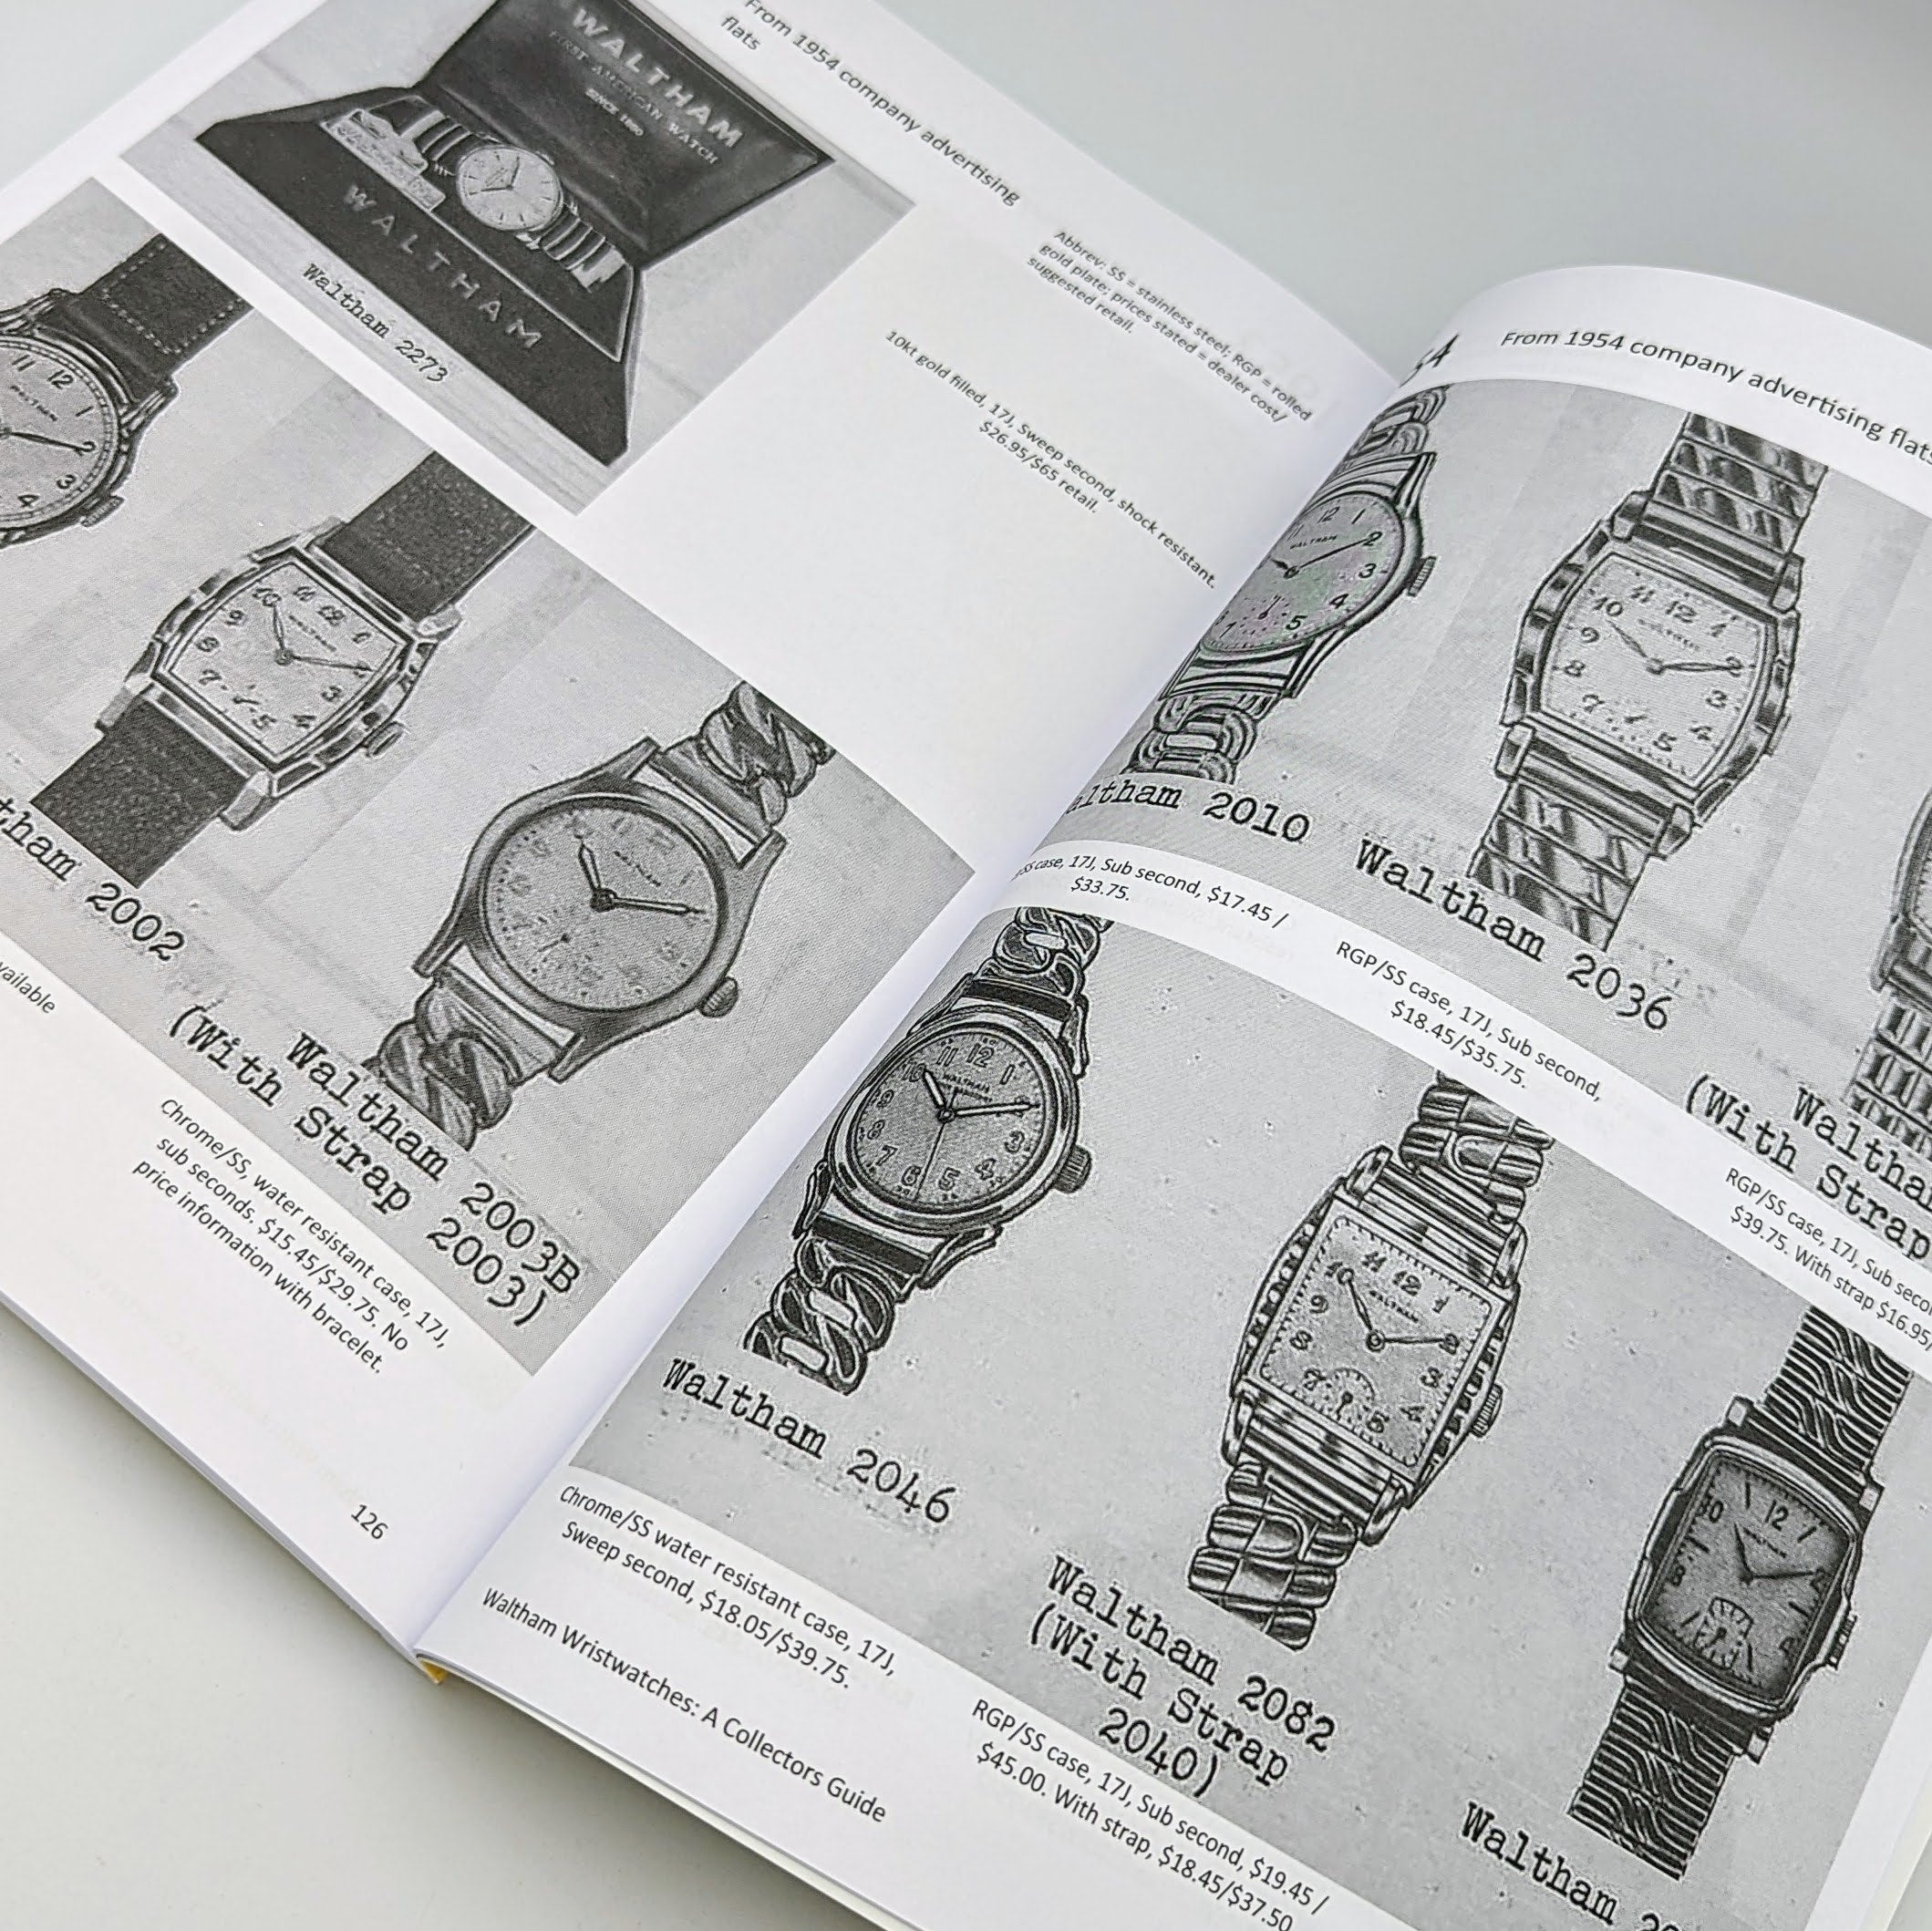 Waltham Wristwatches: A Collectors Guide by Bruce Shawkey +650 Watches Pictured Book